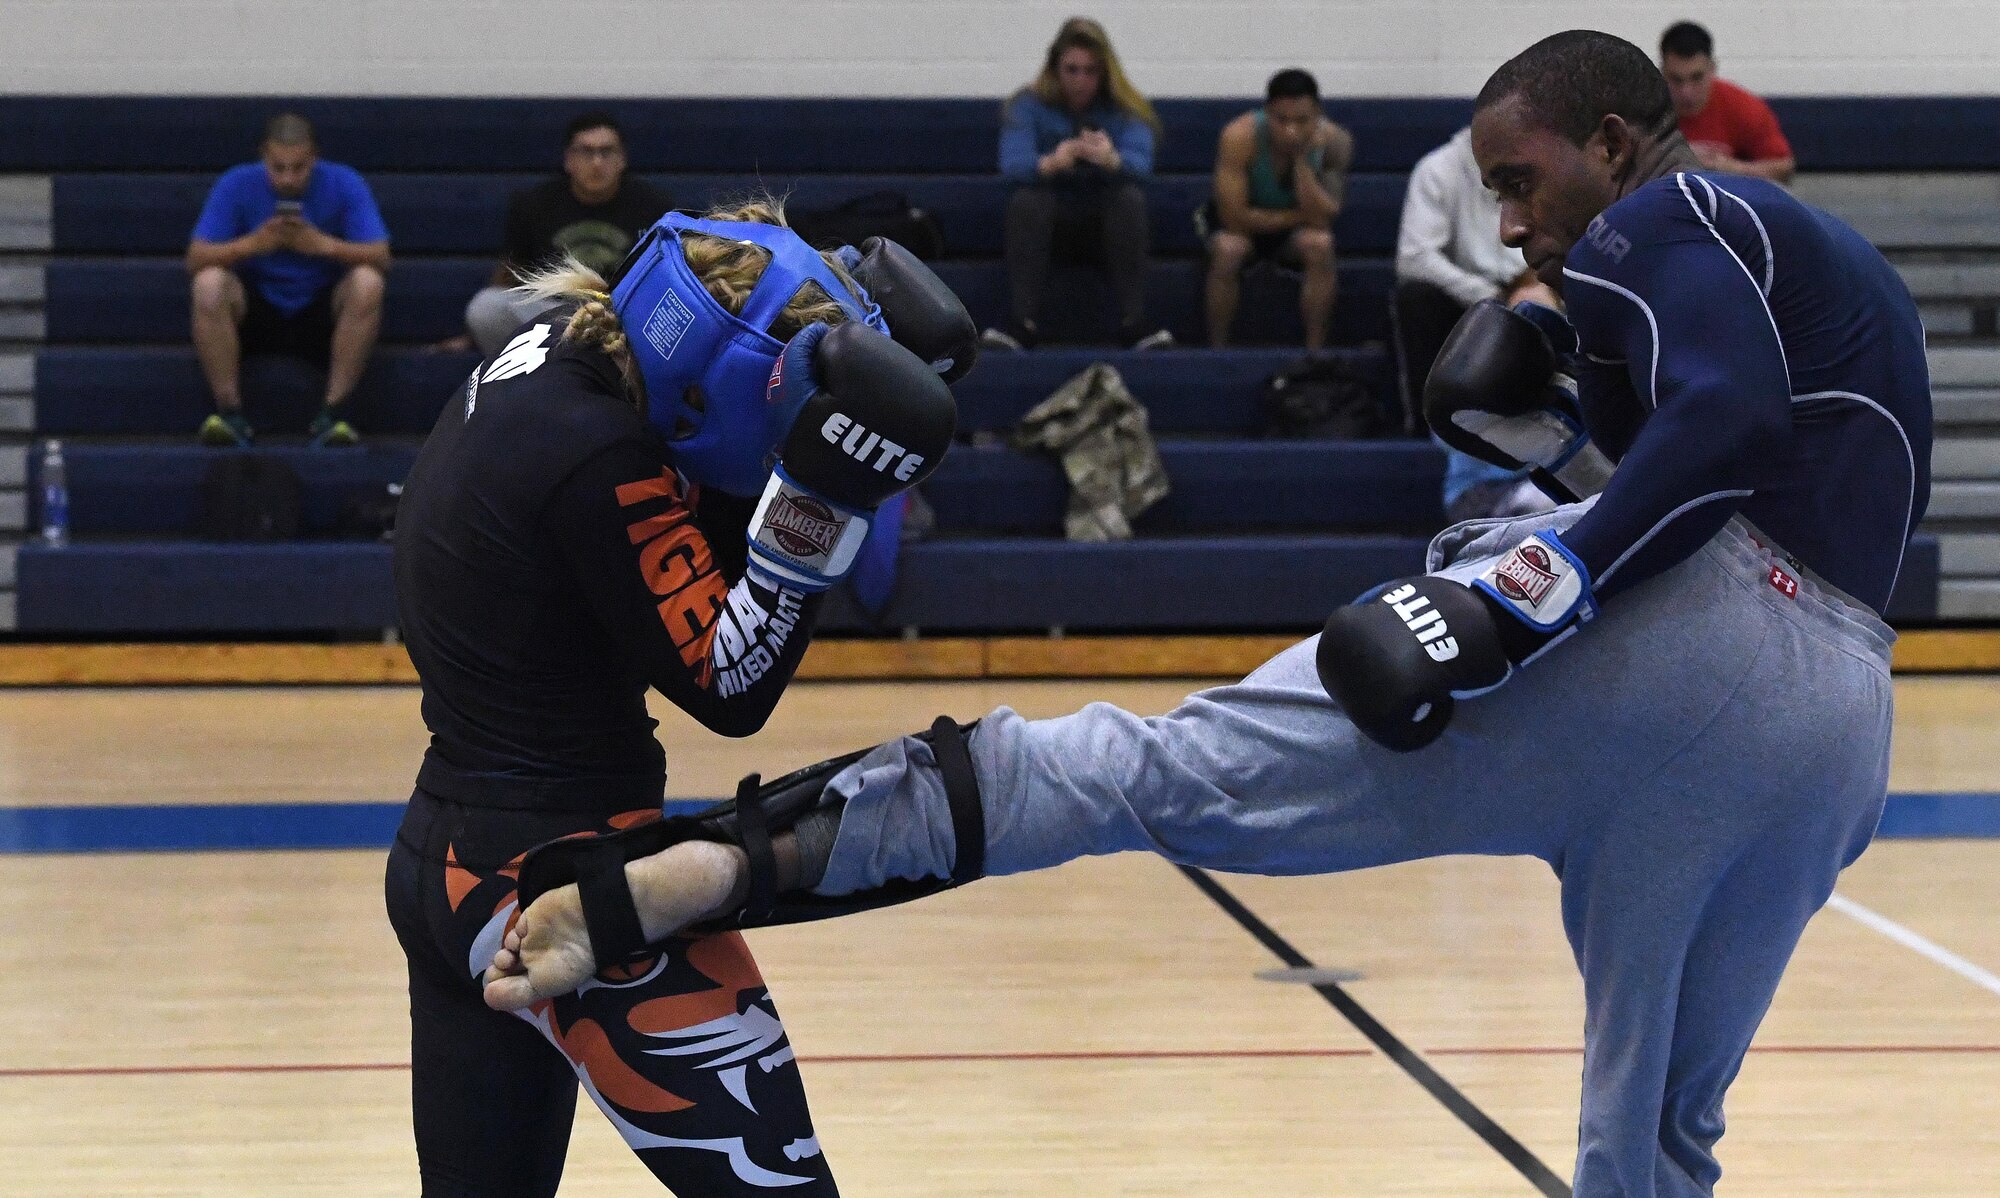 Tech. Sgt. Franklin Mosley, 633rd Security Forces flight chief and combatives course instructor, kicks Valentina Shevchenko, an Ultimate Fighting Championship Muay Thai specialist, during a training session at Joint Base Langley-Eustis, Va., Dec. 9, 2016. Shevchenko visited JBLE as part of a morale tour and used her free time between events to train for an upcoming match. She is also a professional kickboxer from Kyrgyzstan, who began her professional career when she was 12 years old, when she knocked out a 22-year-old opponent, earning the nickname “Bullet.” (U.S. Air Force photo by Staff Sgt. Nick Wilson)